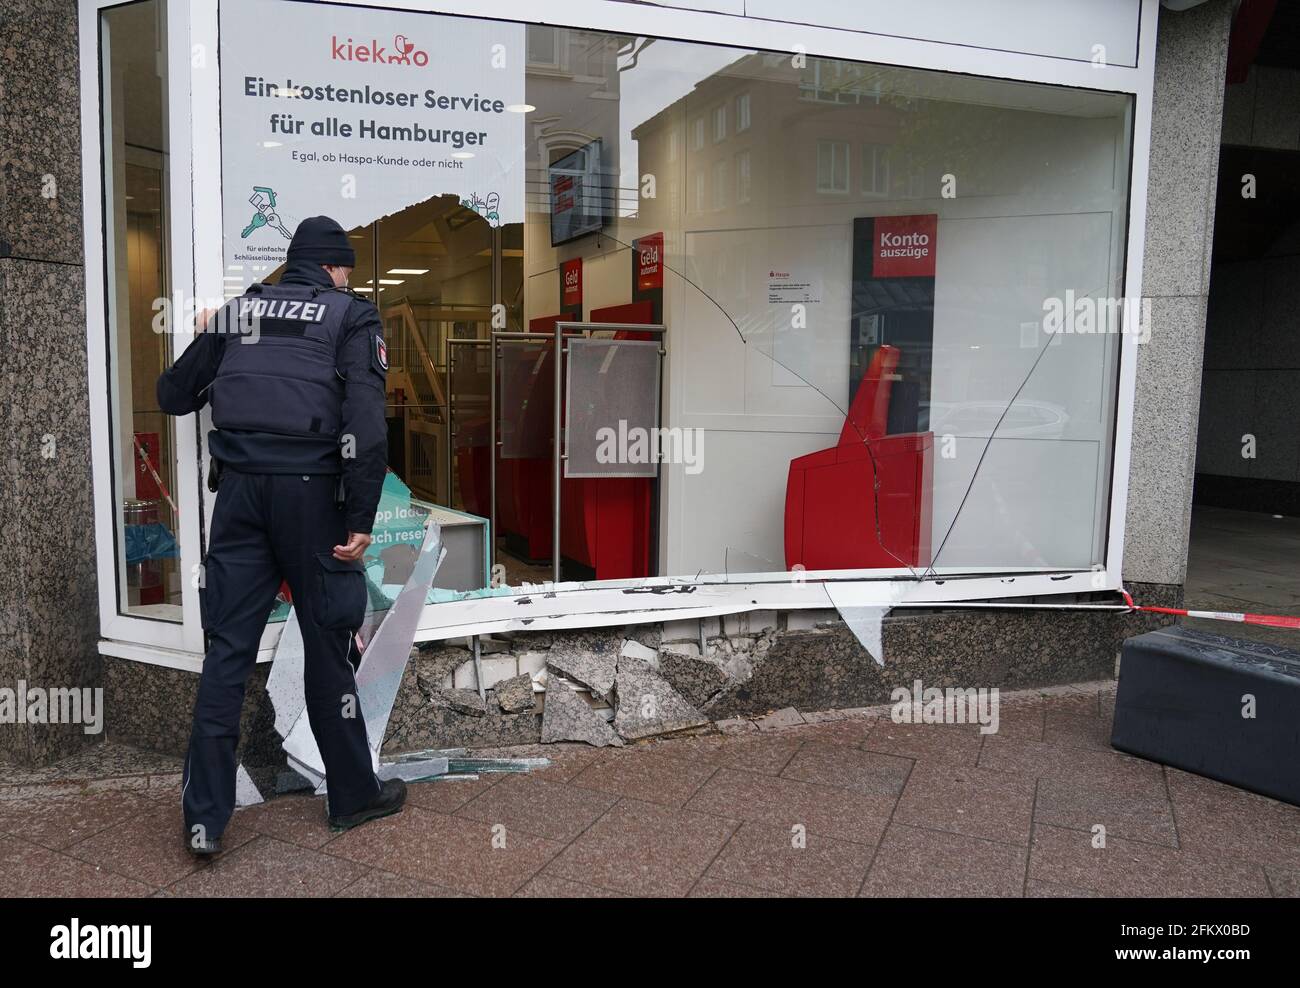 Hamburg, Germany. 04th May, 2021. A policeman stands in front of the window of a Haspa branch that was destroyed in an accident. In Waitzstraße in Hamburg, which is known for numerous 'shop window accidents', a car has once again crashed into the window of a shop. On Tuesday, a 73-year-old woman lost control of her car and crashed it into the building housing the Hamburg savings bank Haspa, a police spokesman told the Deutsche Presse-Agentur in Hamburg. Credit: Marcus Brandt/dpa/Alamy Live News Stock Photo